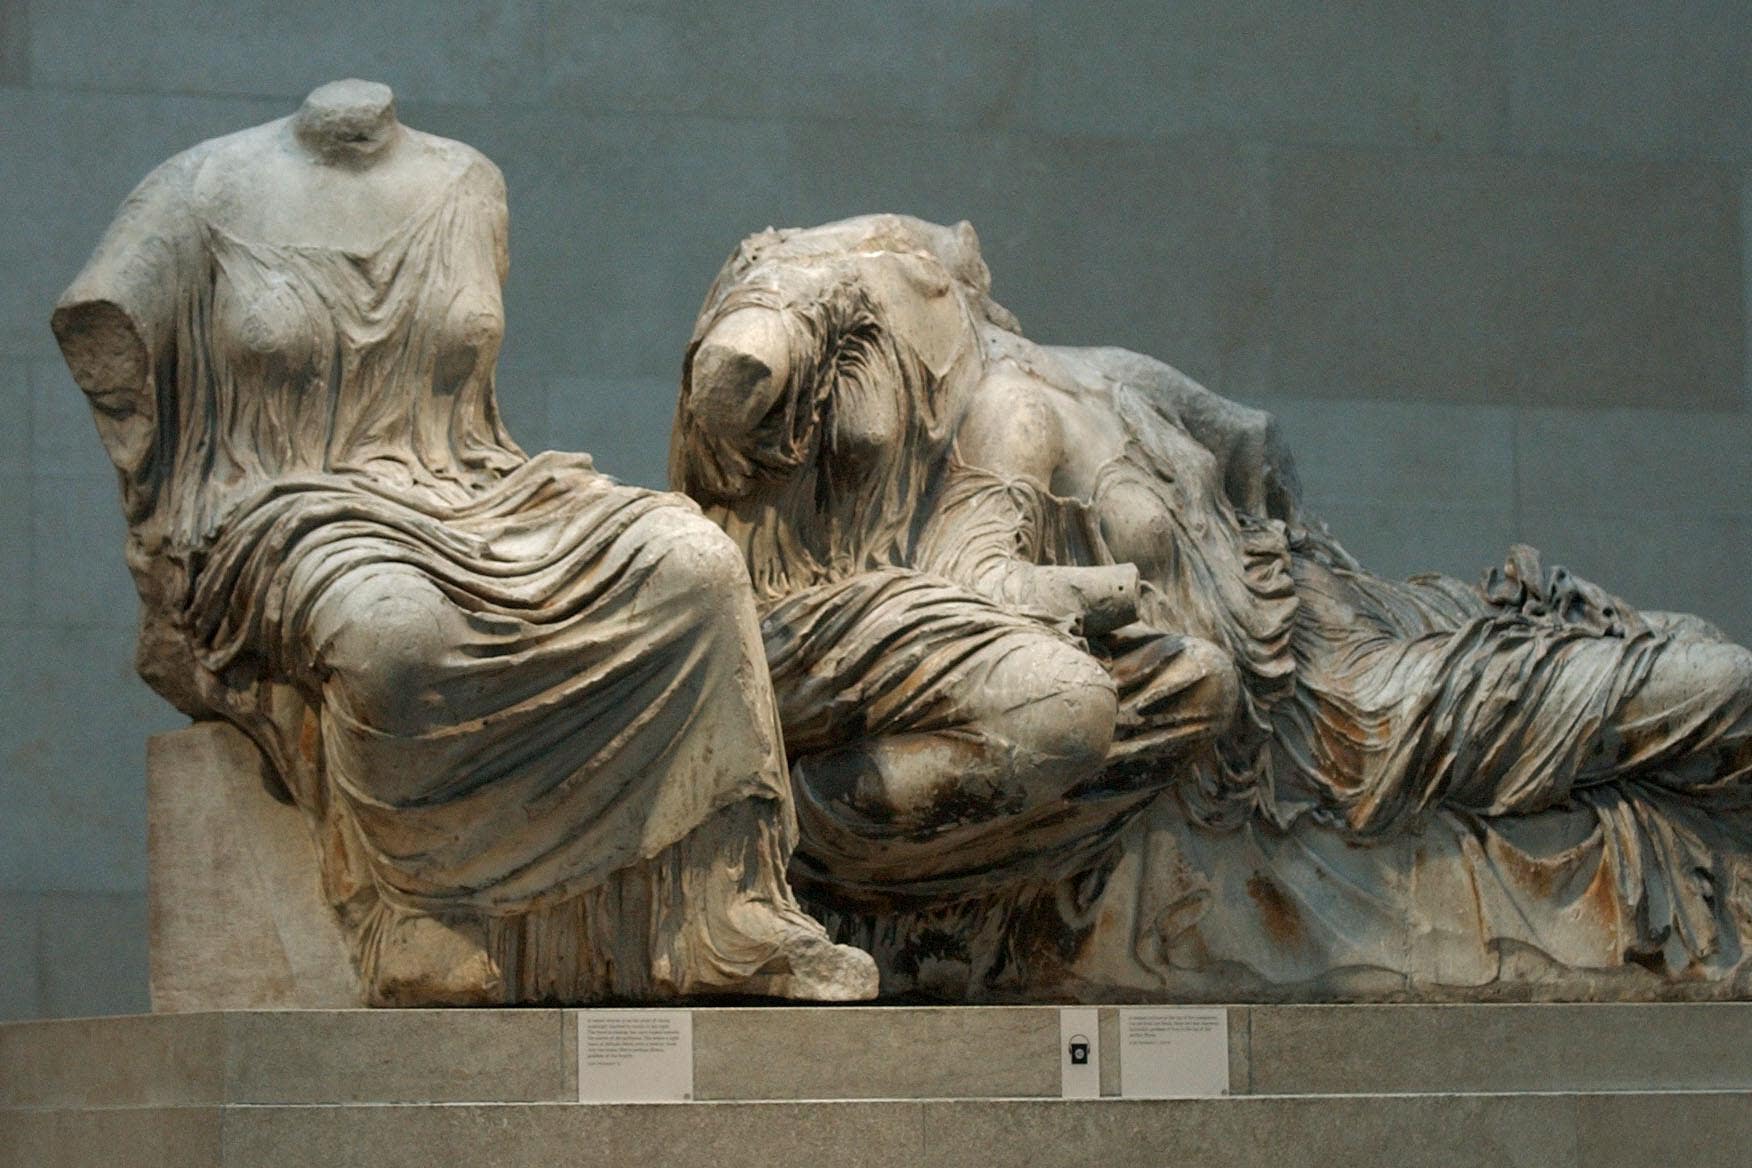 Sir Tony wanted to use the Elgin Marbles as a ‘bargaining chip’ with Greece